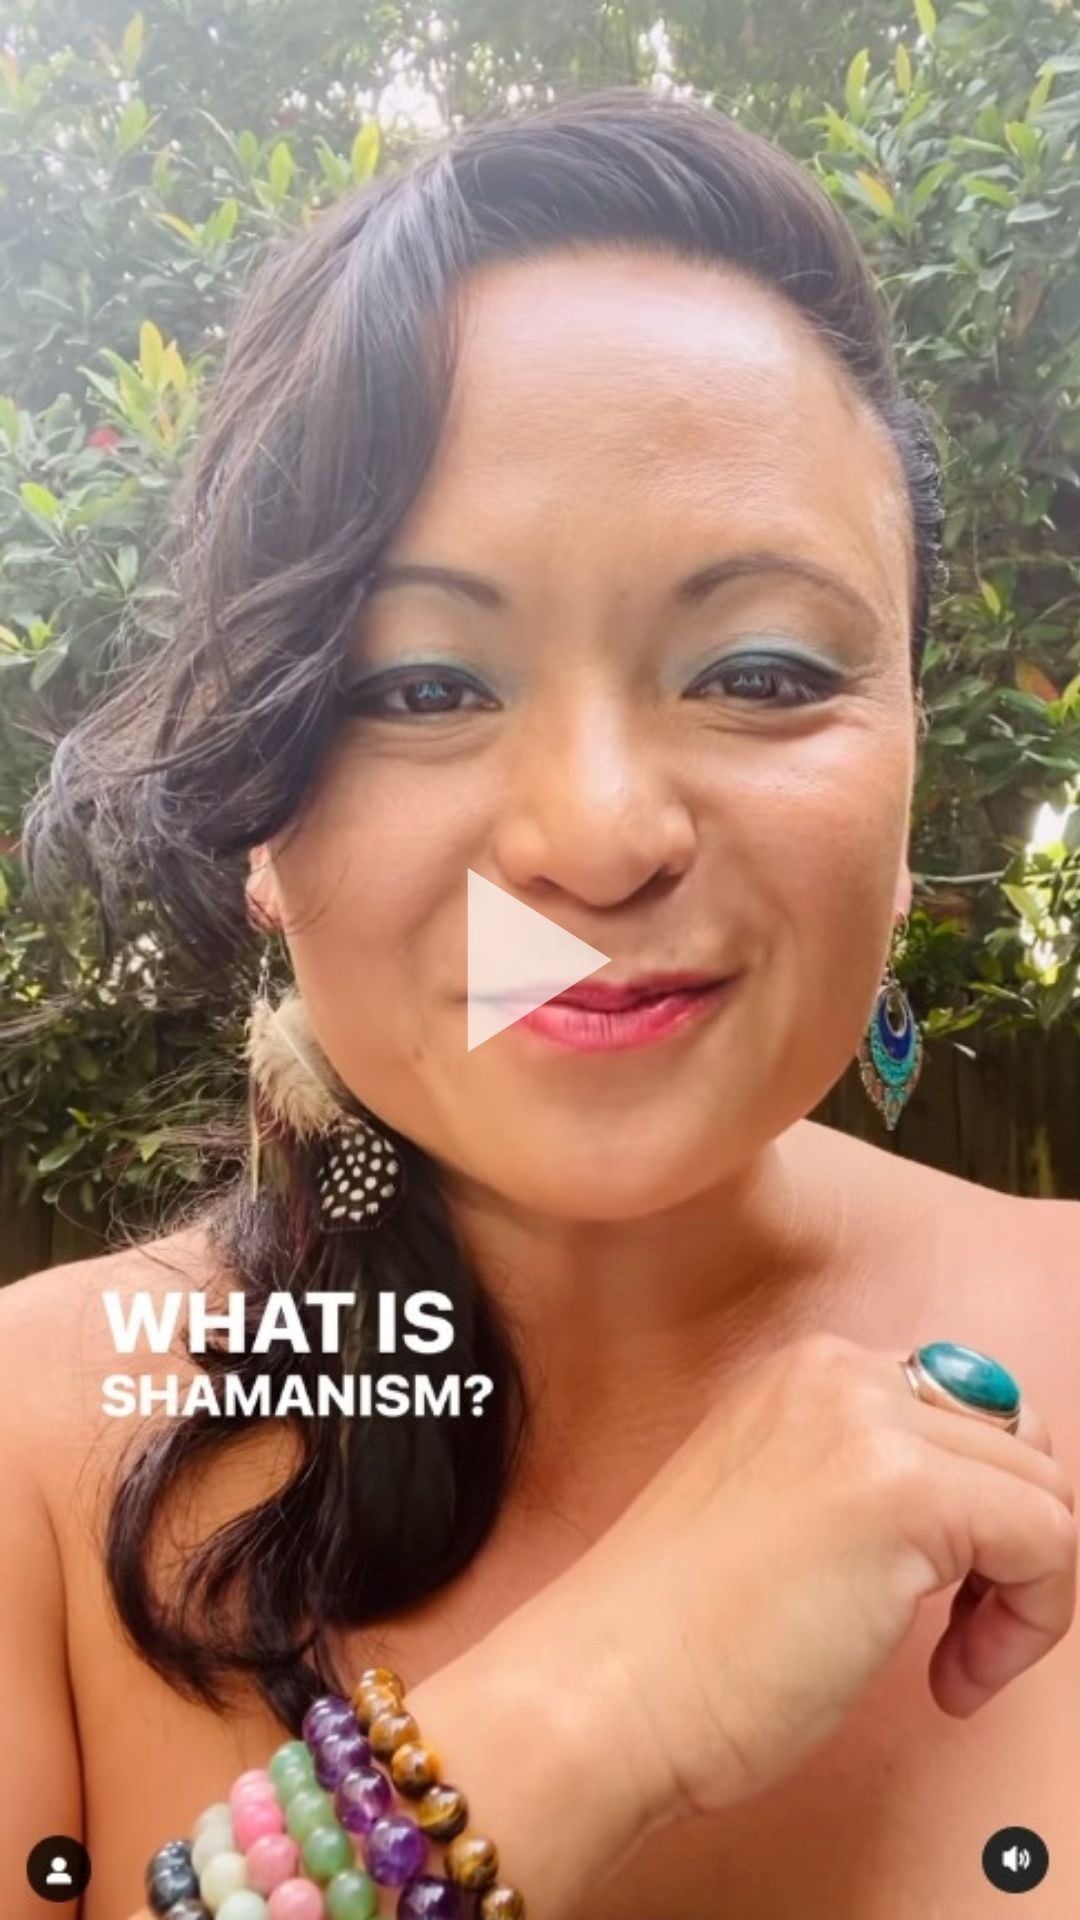 WHAT IS SHAMANISM?